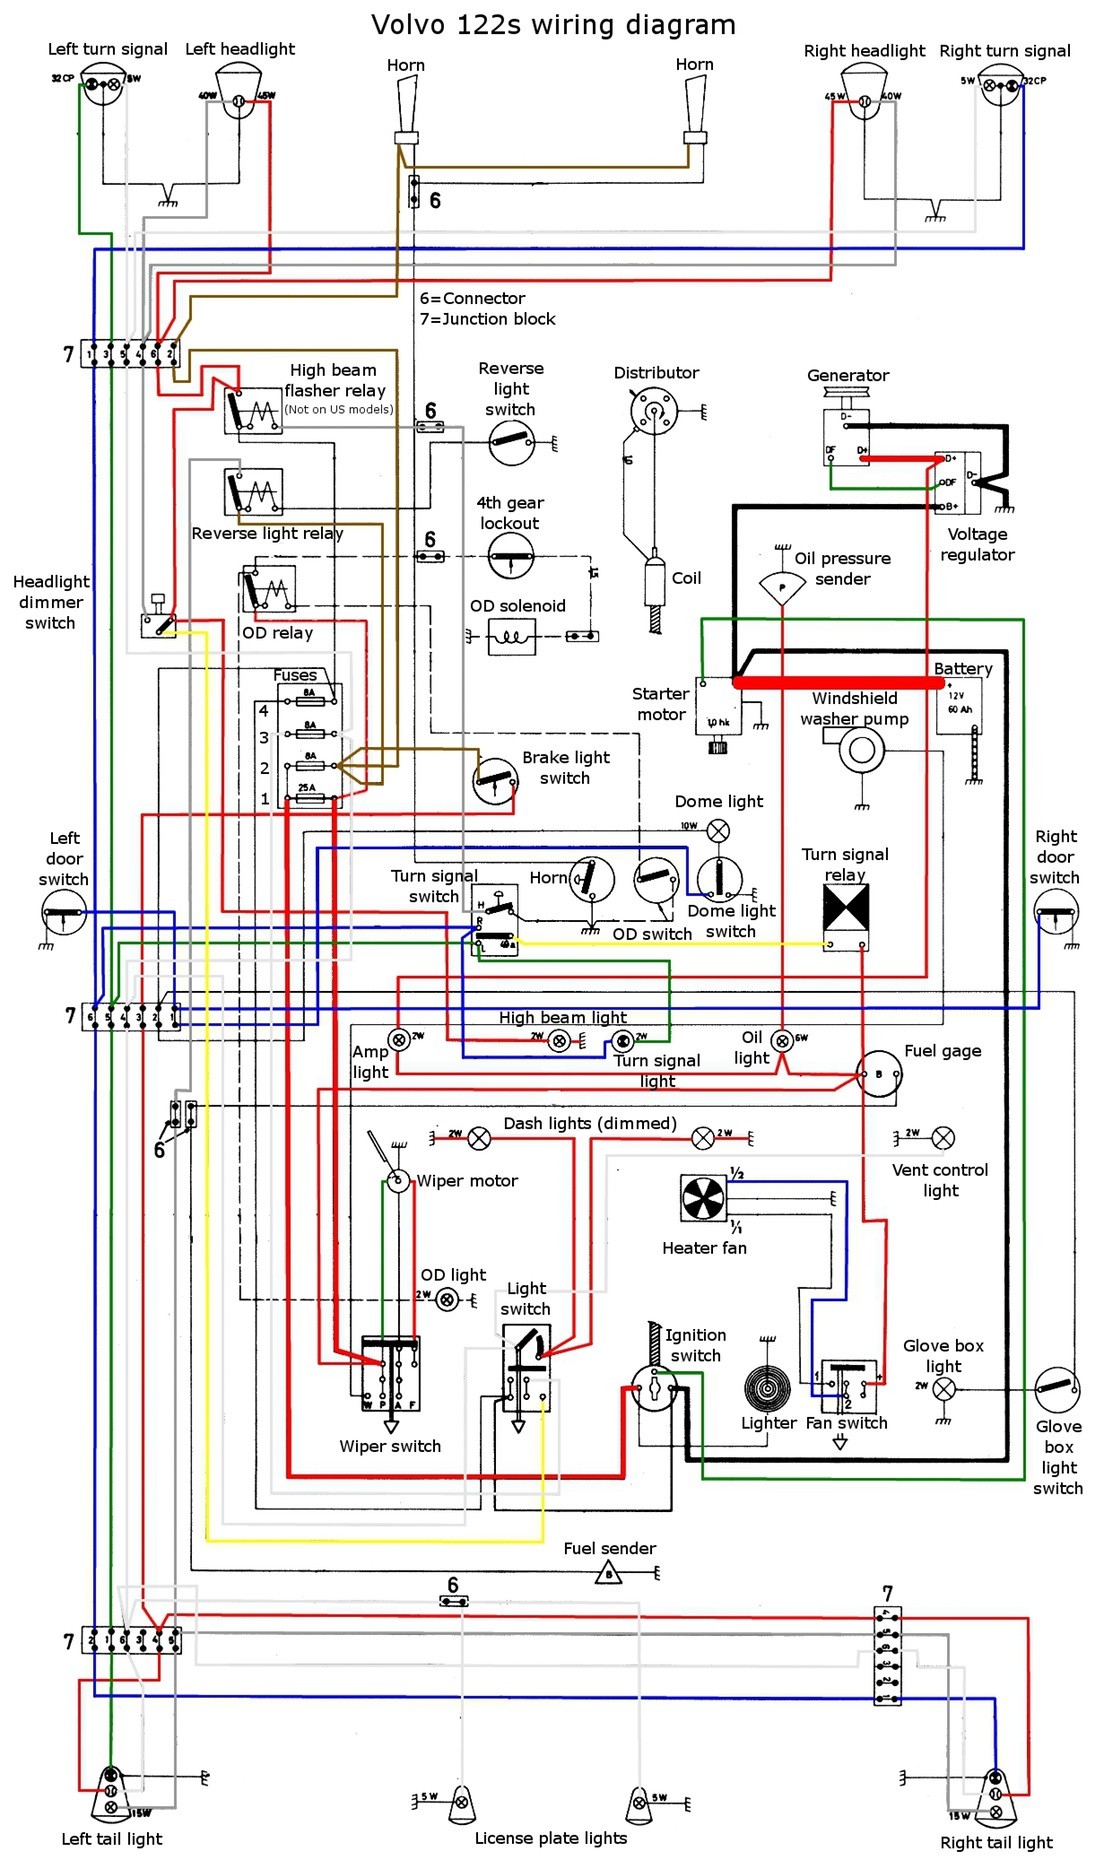 Mechanical Electrical size Mystery Wires Also Do You Have The Wiring Diagram If Not